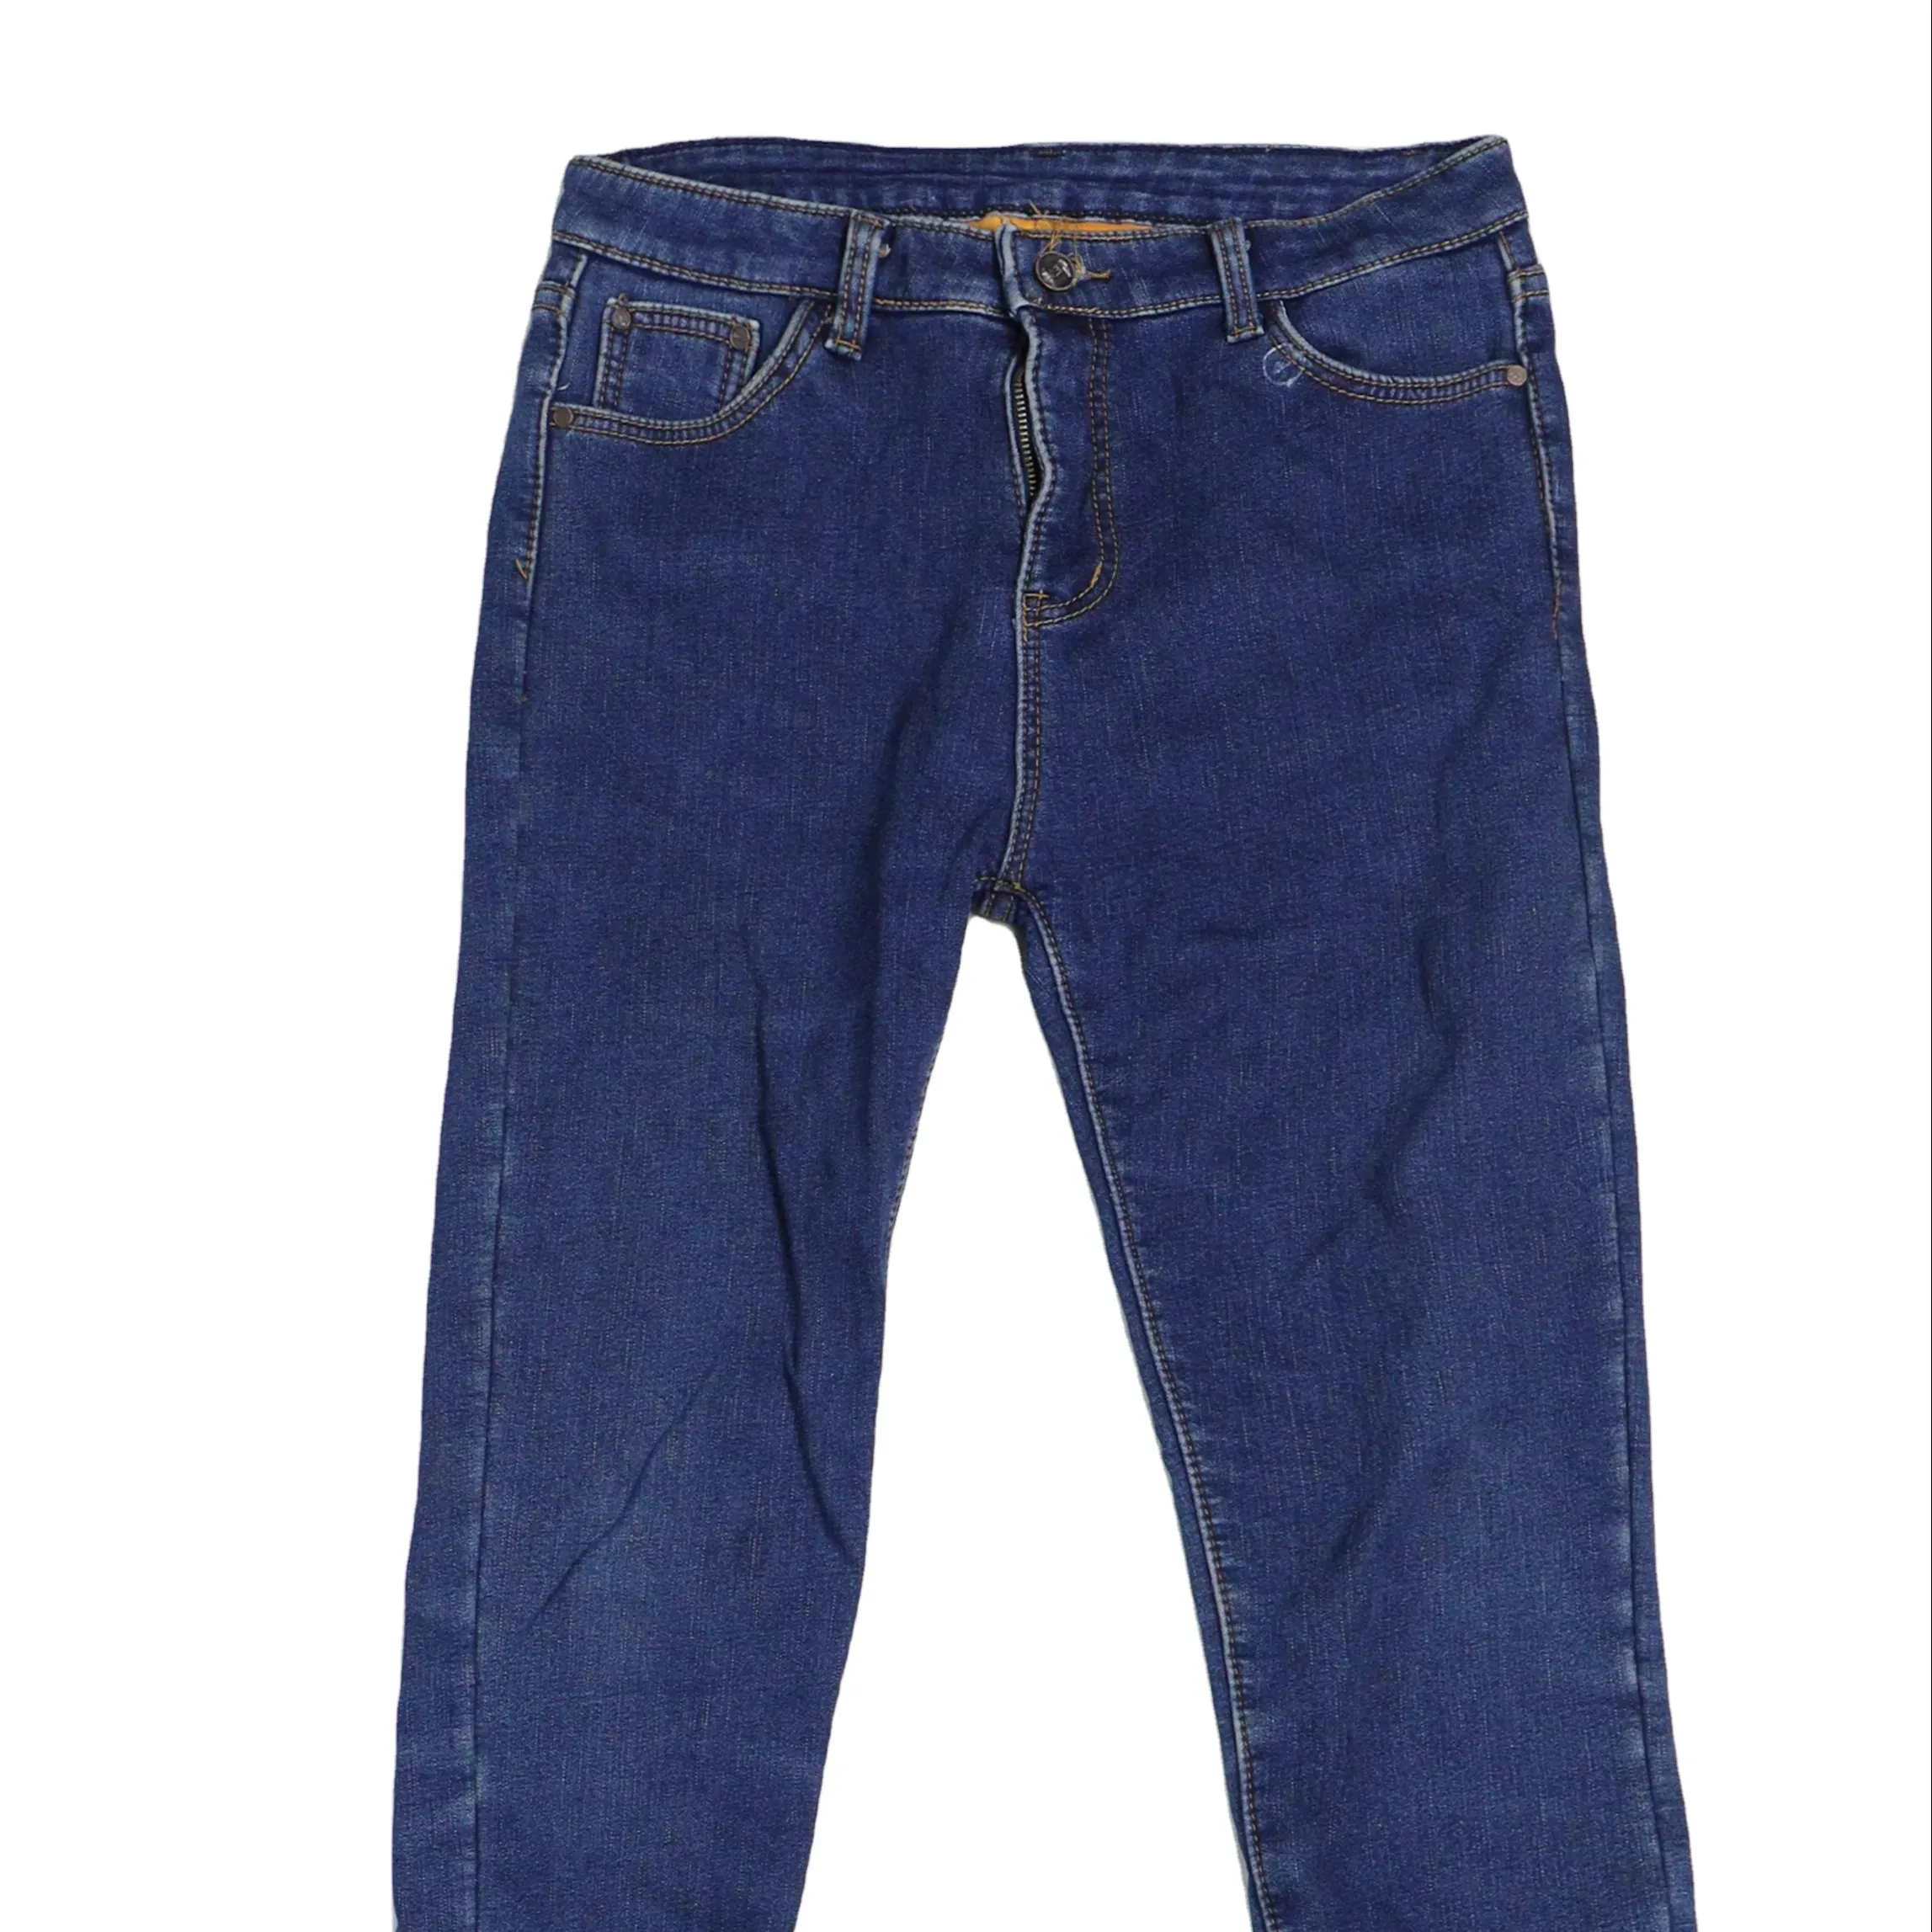 Cheap Price Jeans Second Hand clothes Thick style clothes and pants Wholesale In Bales Used clothing